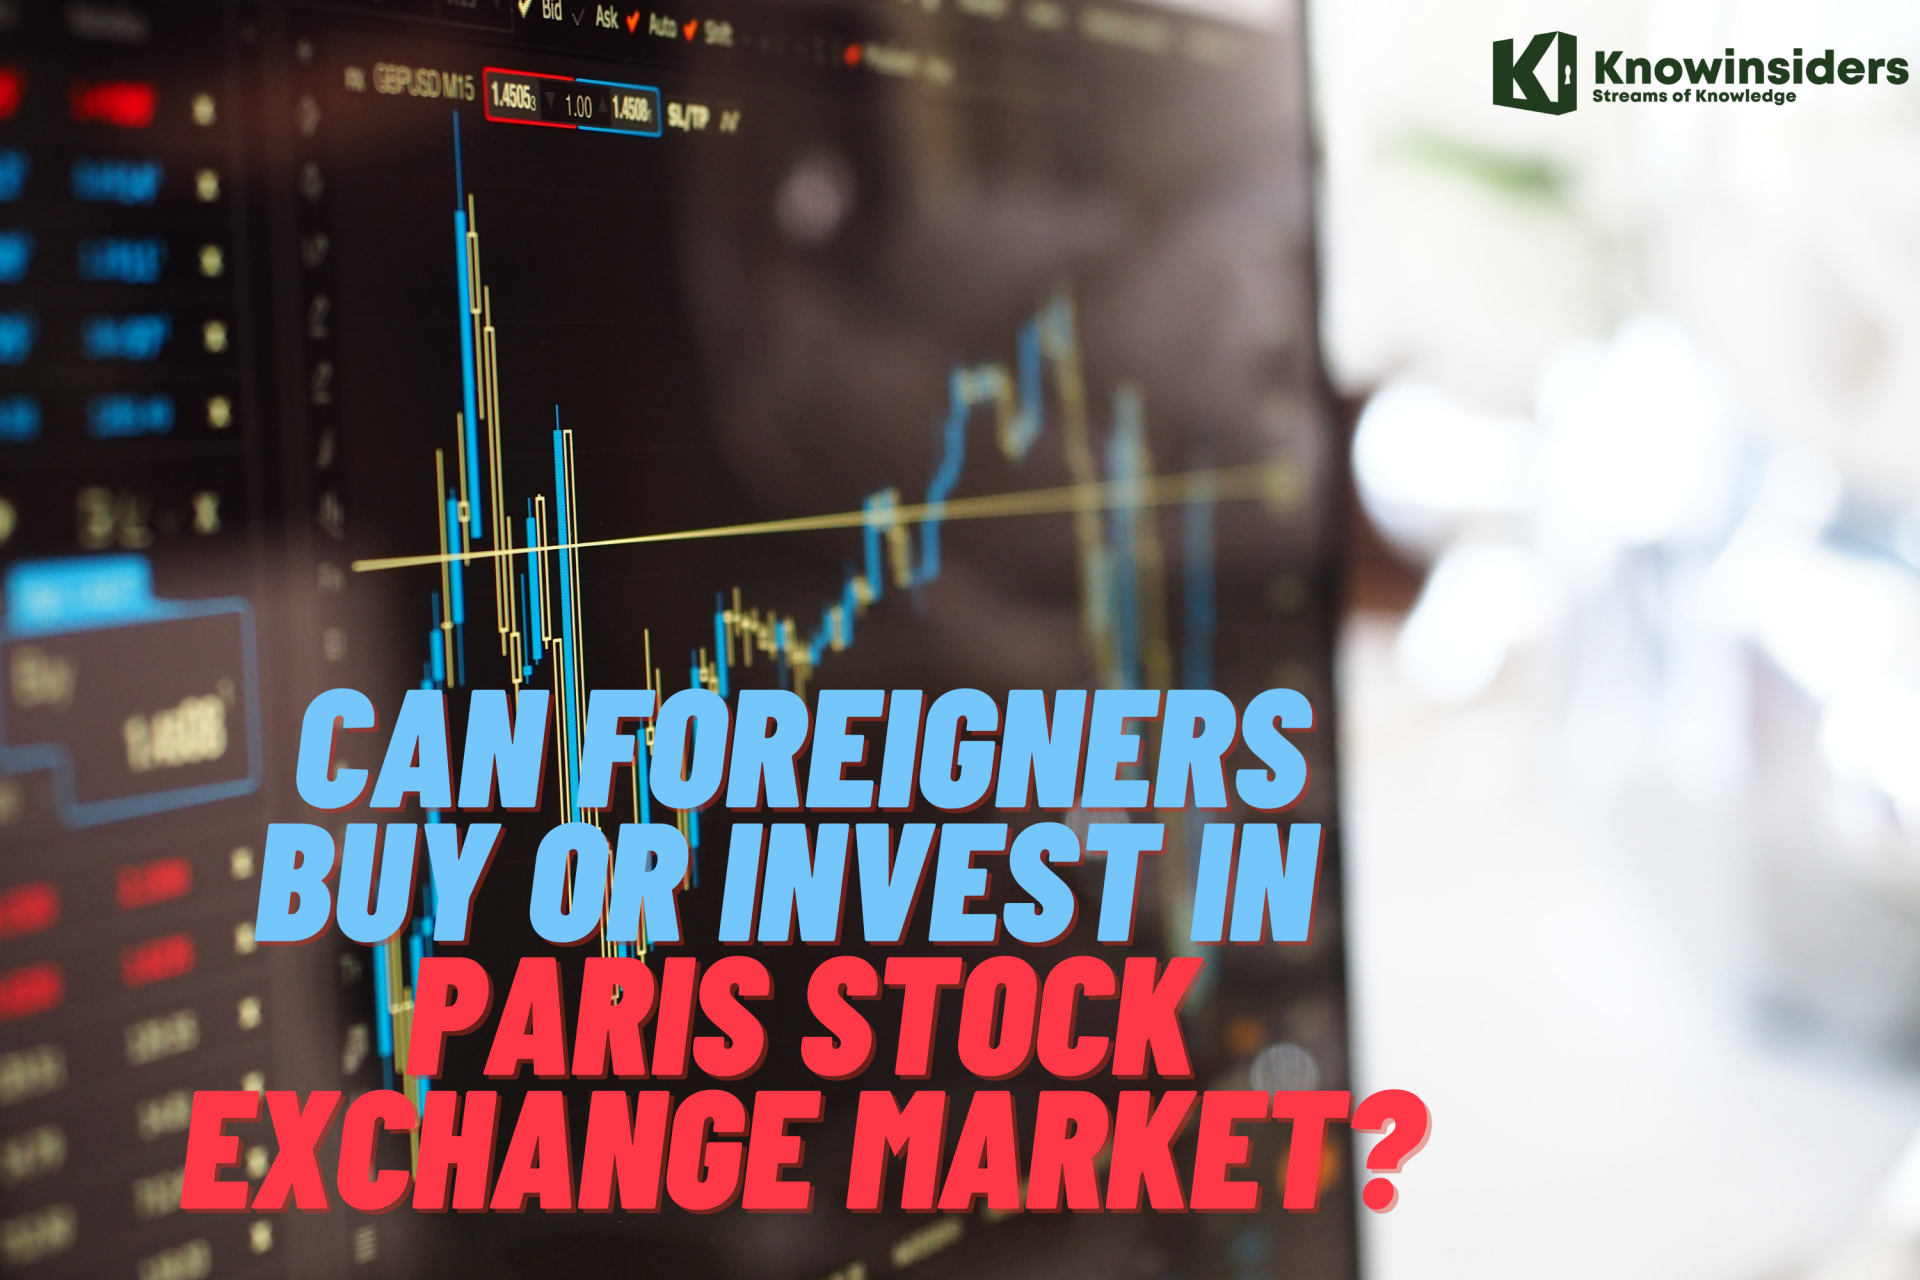 Can Foreigners Buy or Invest in Paris Stock Exchange Market?